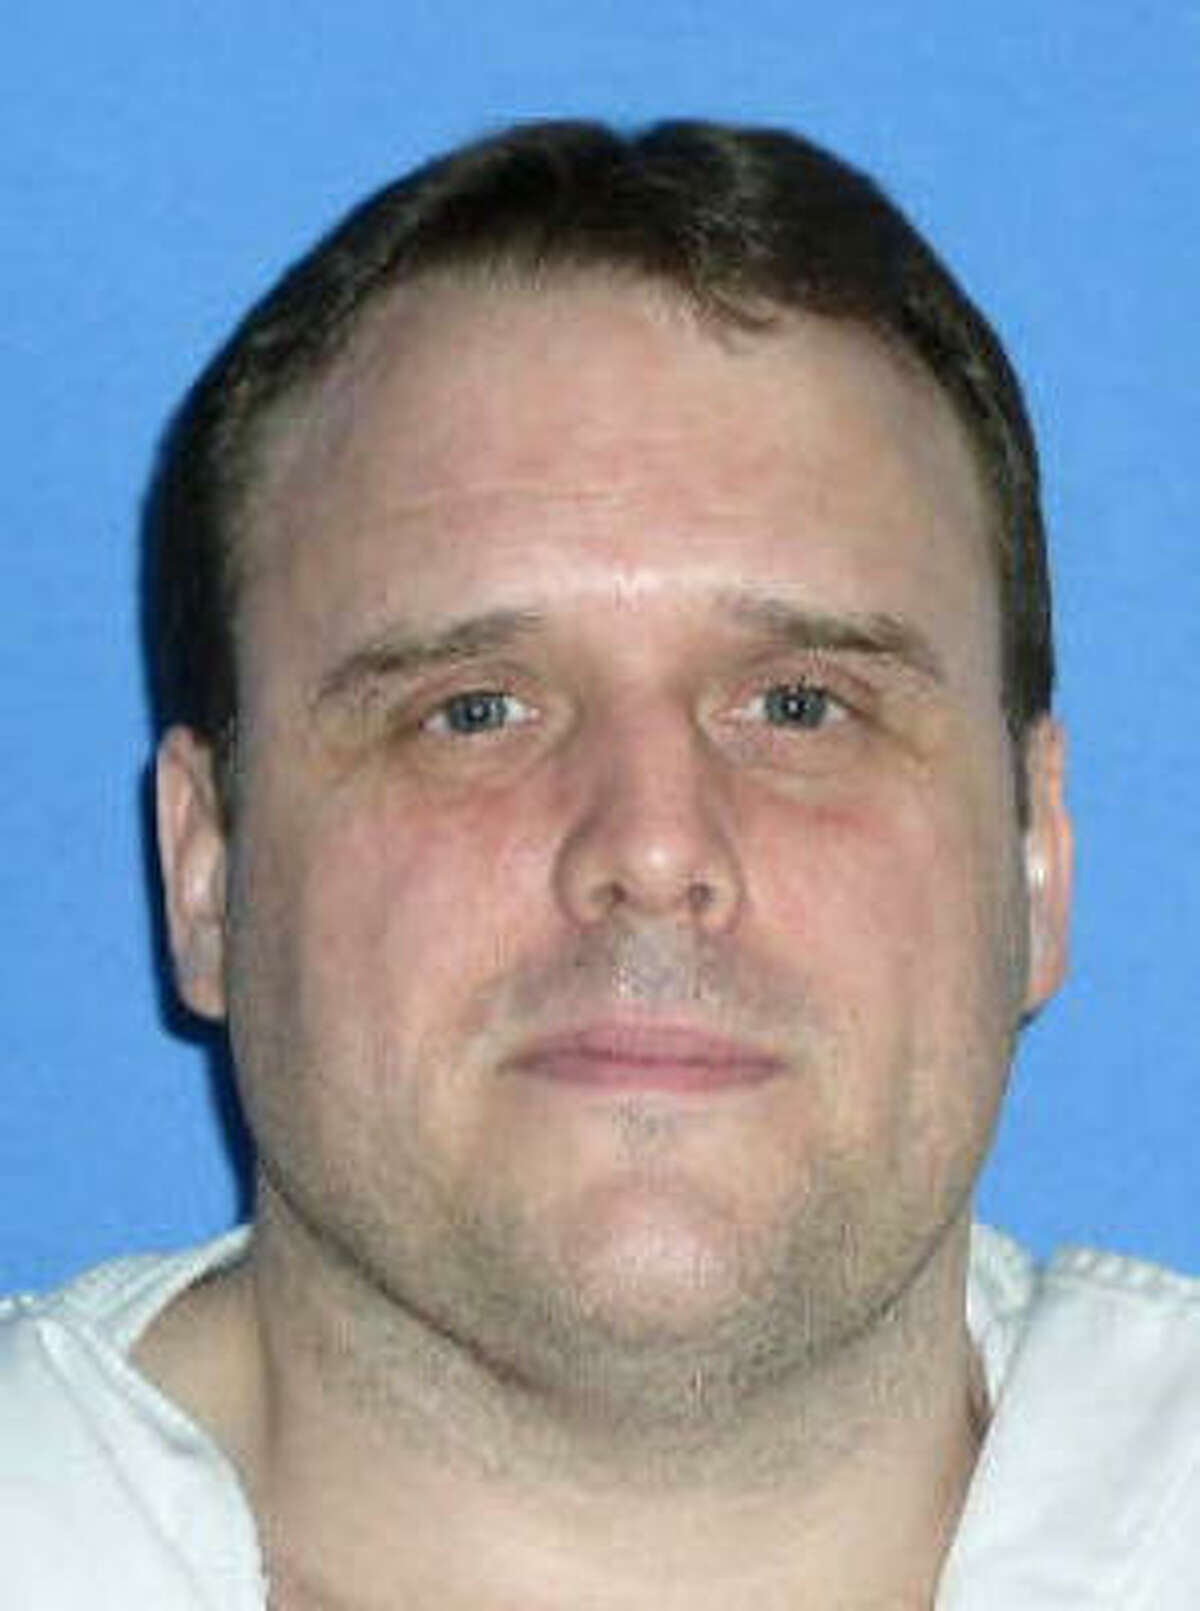 Before his execution Tuesday, Patrick Knight said "... the other joke is that I am not Patrick Bryan Knight and y'all can't stop this execution now. Go ahead, I'm finished."